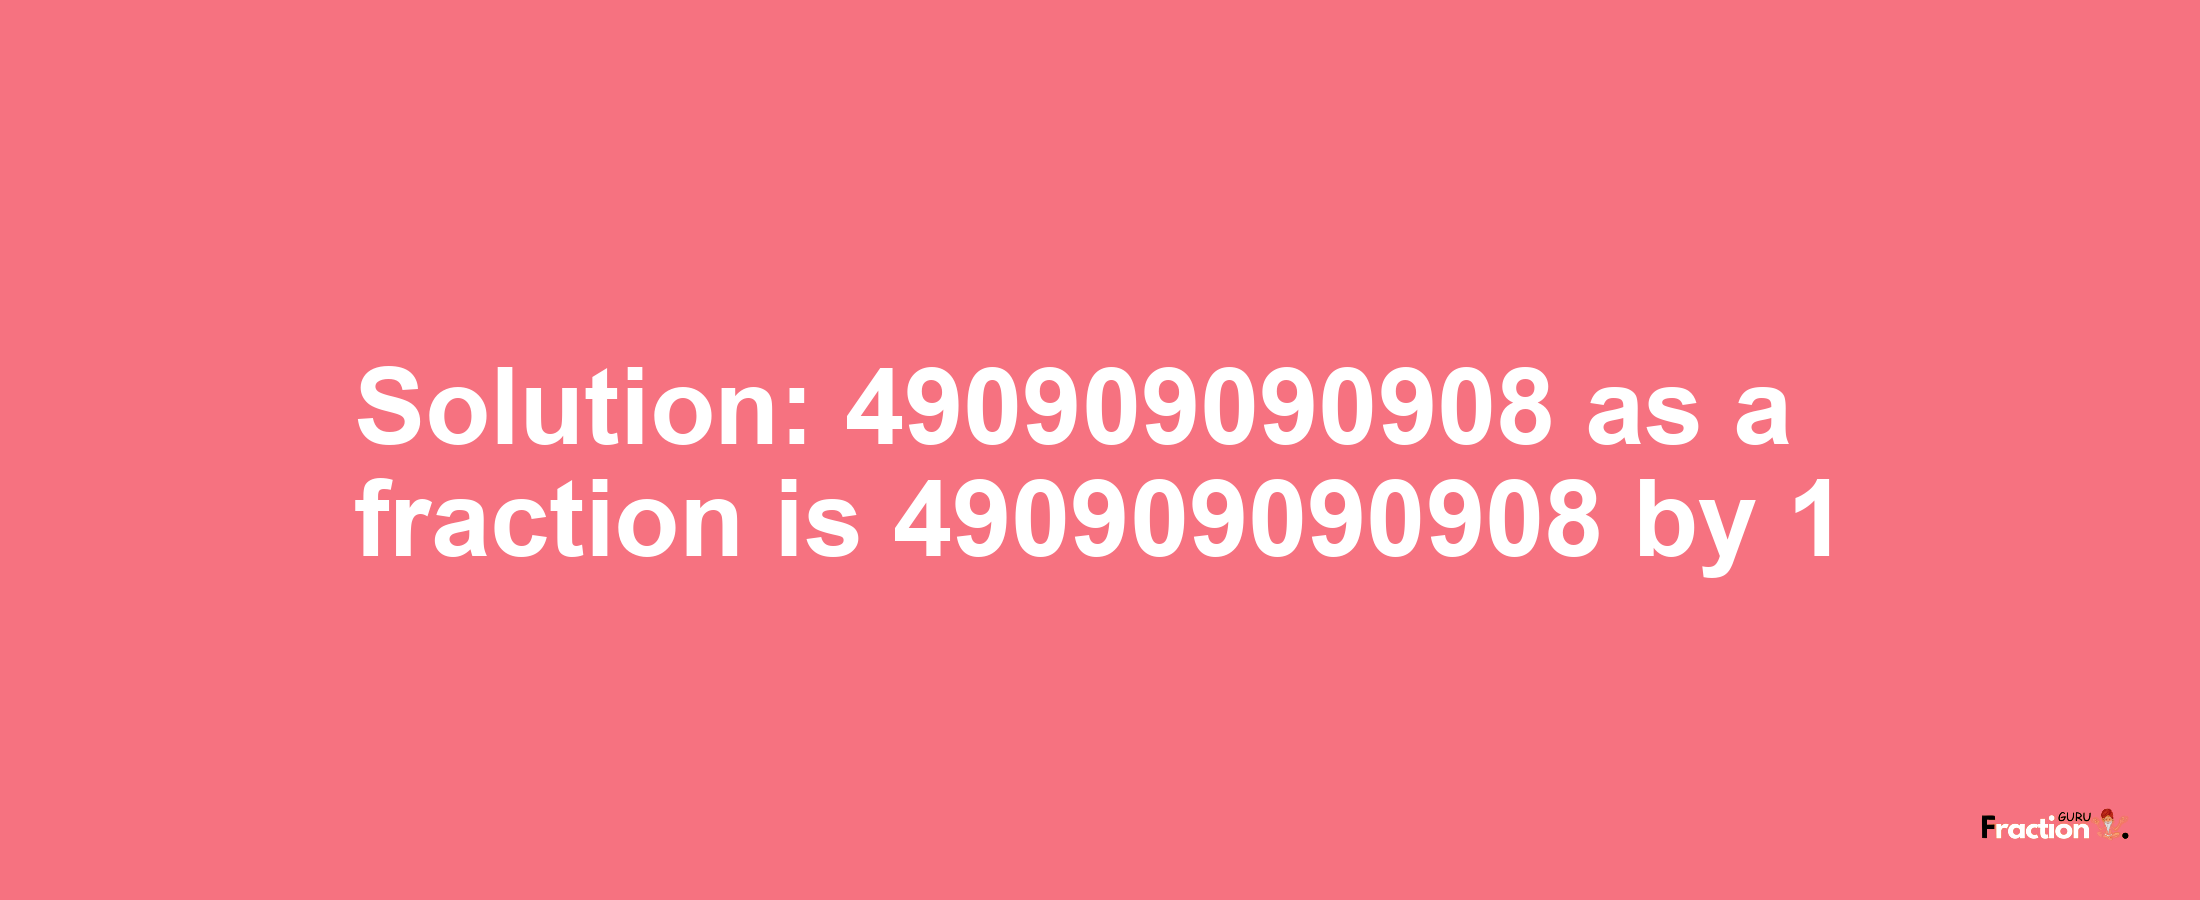 Solution:490909090908 as a fraction is 490909090908/1